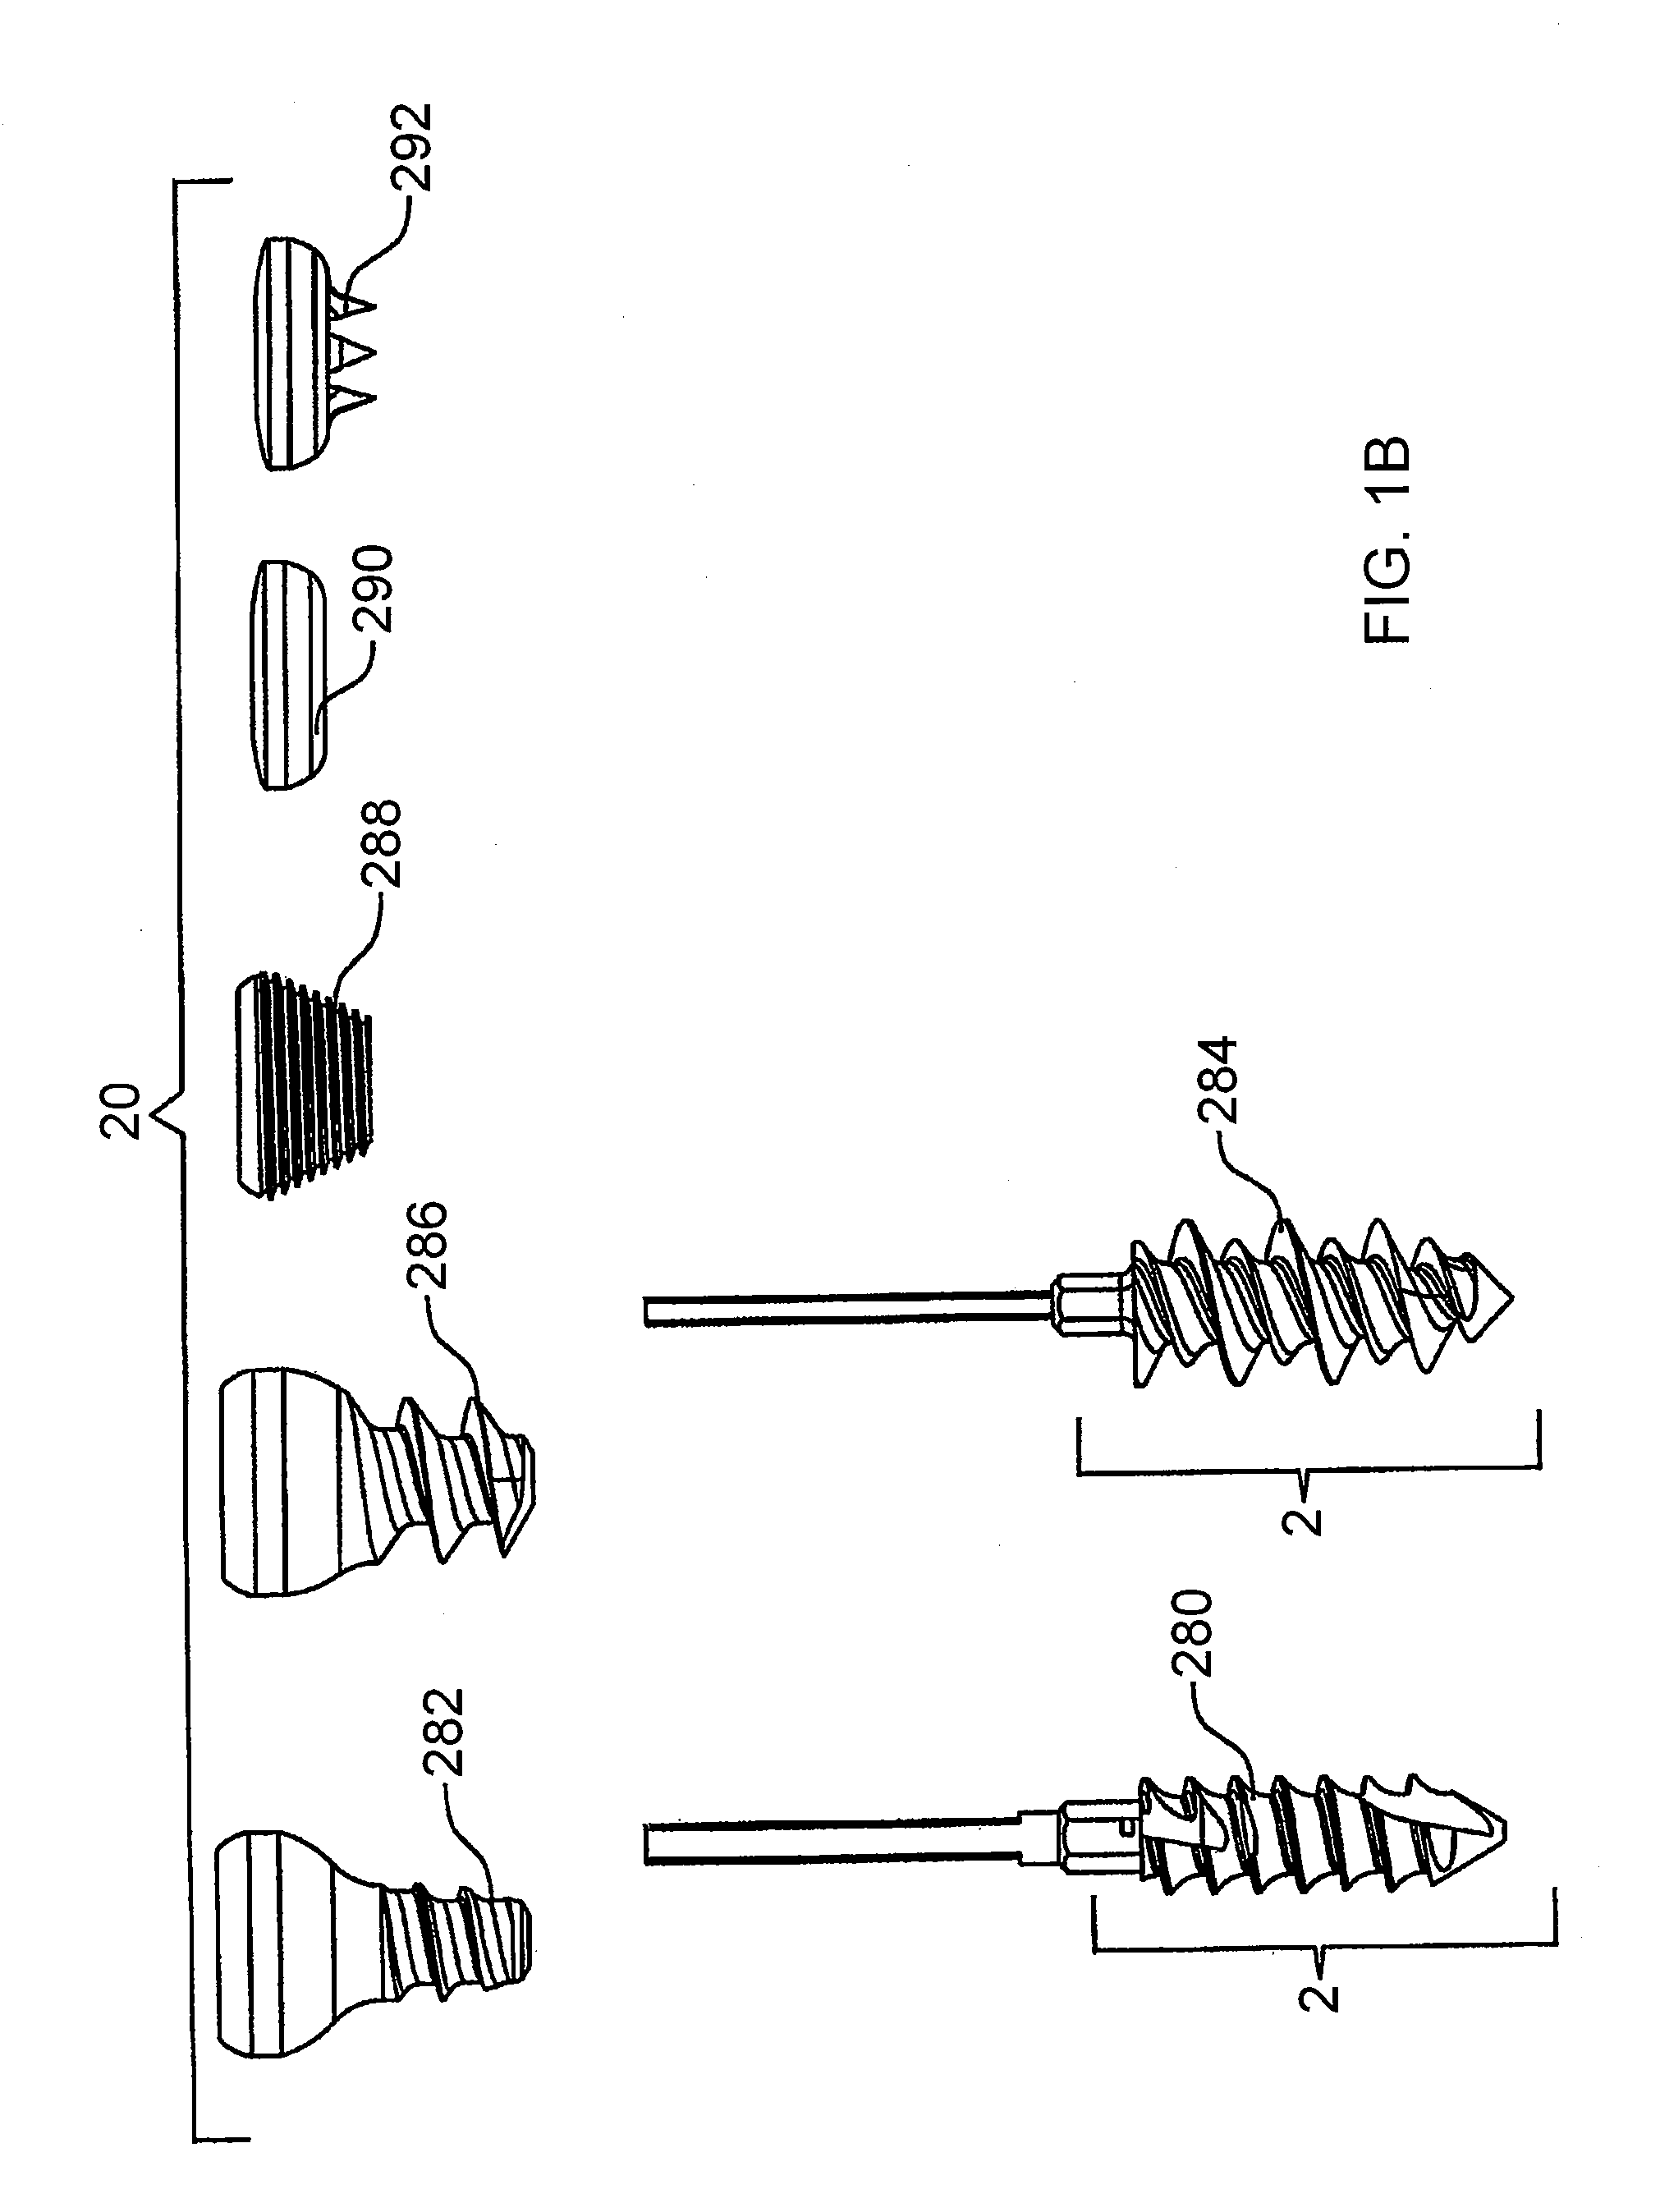 Guide system and method for the fixation of bone fractures